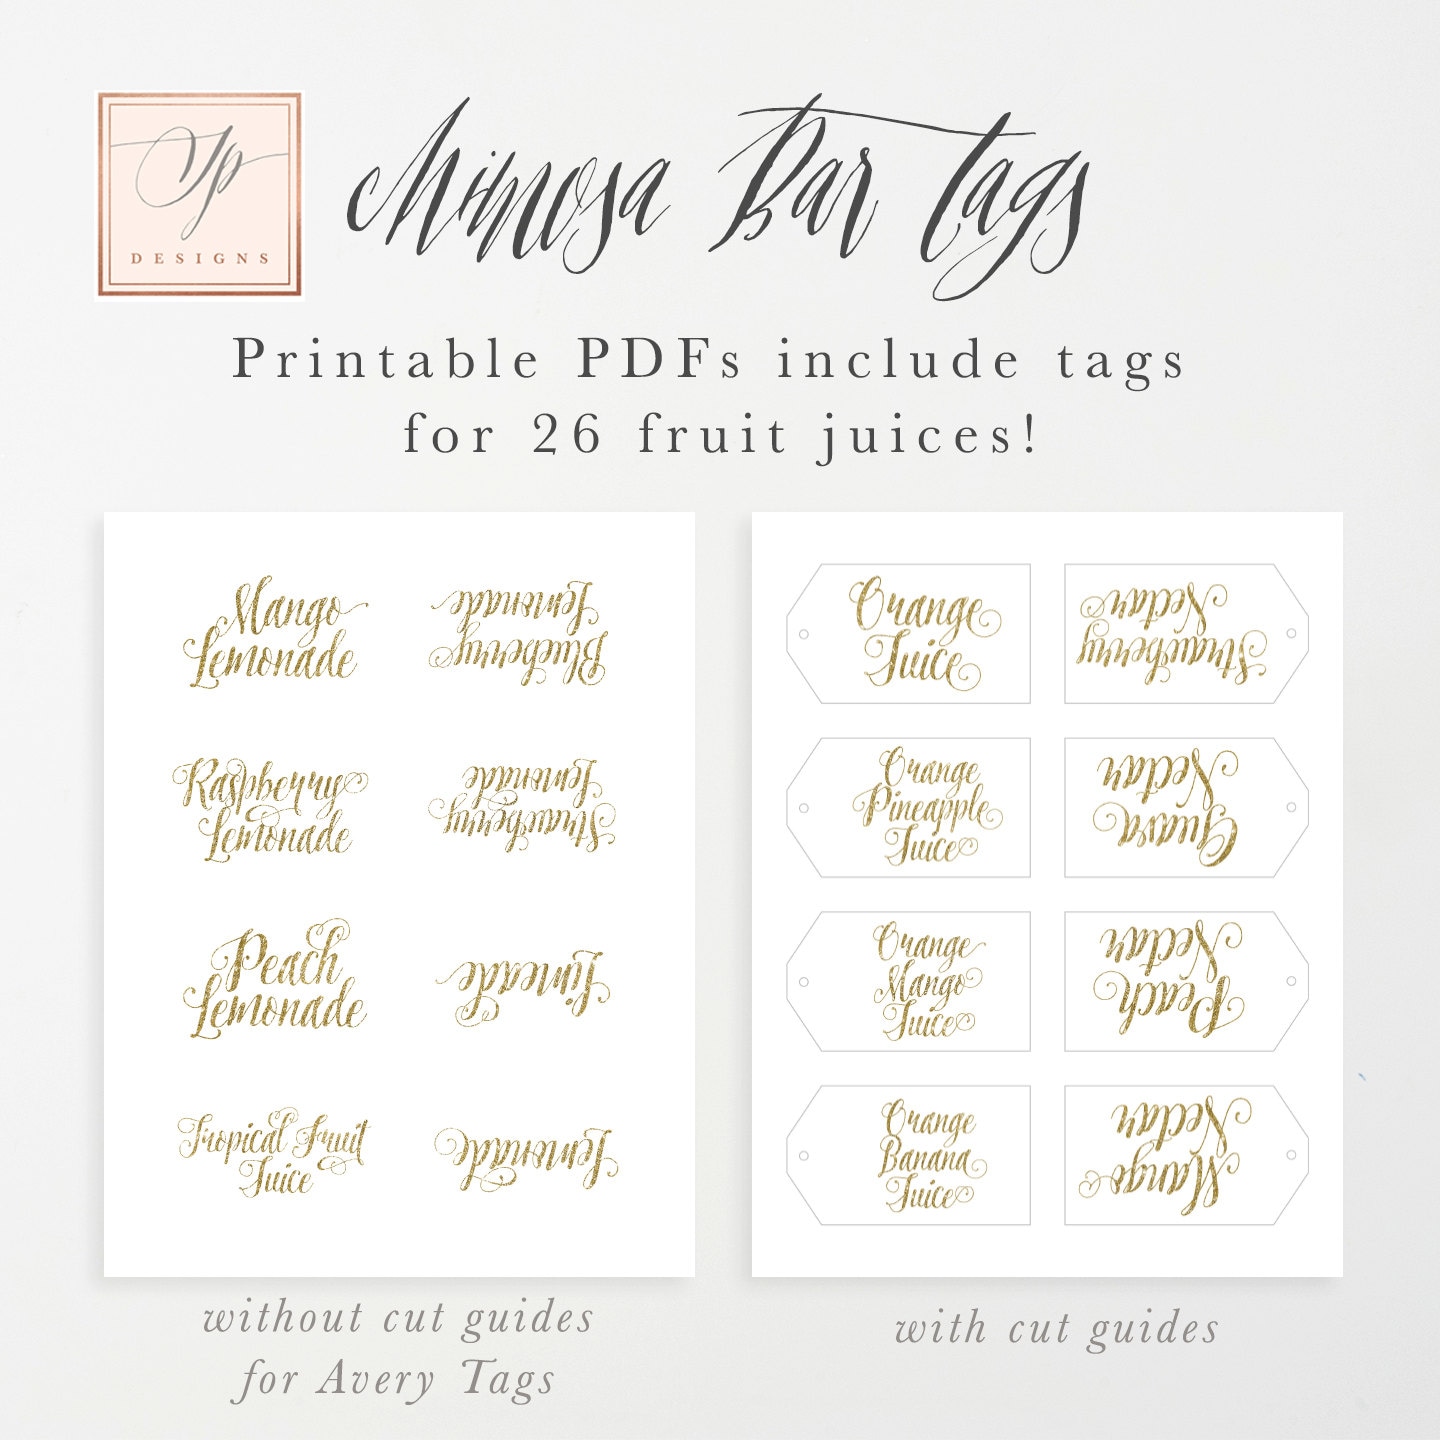 Ava Mimosa Bar Juice Drink Tags Labels for Bubbly Champagne Bars at Bridal  Shower, Wedding Party or Parties White & Gold Glitter 